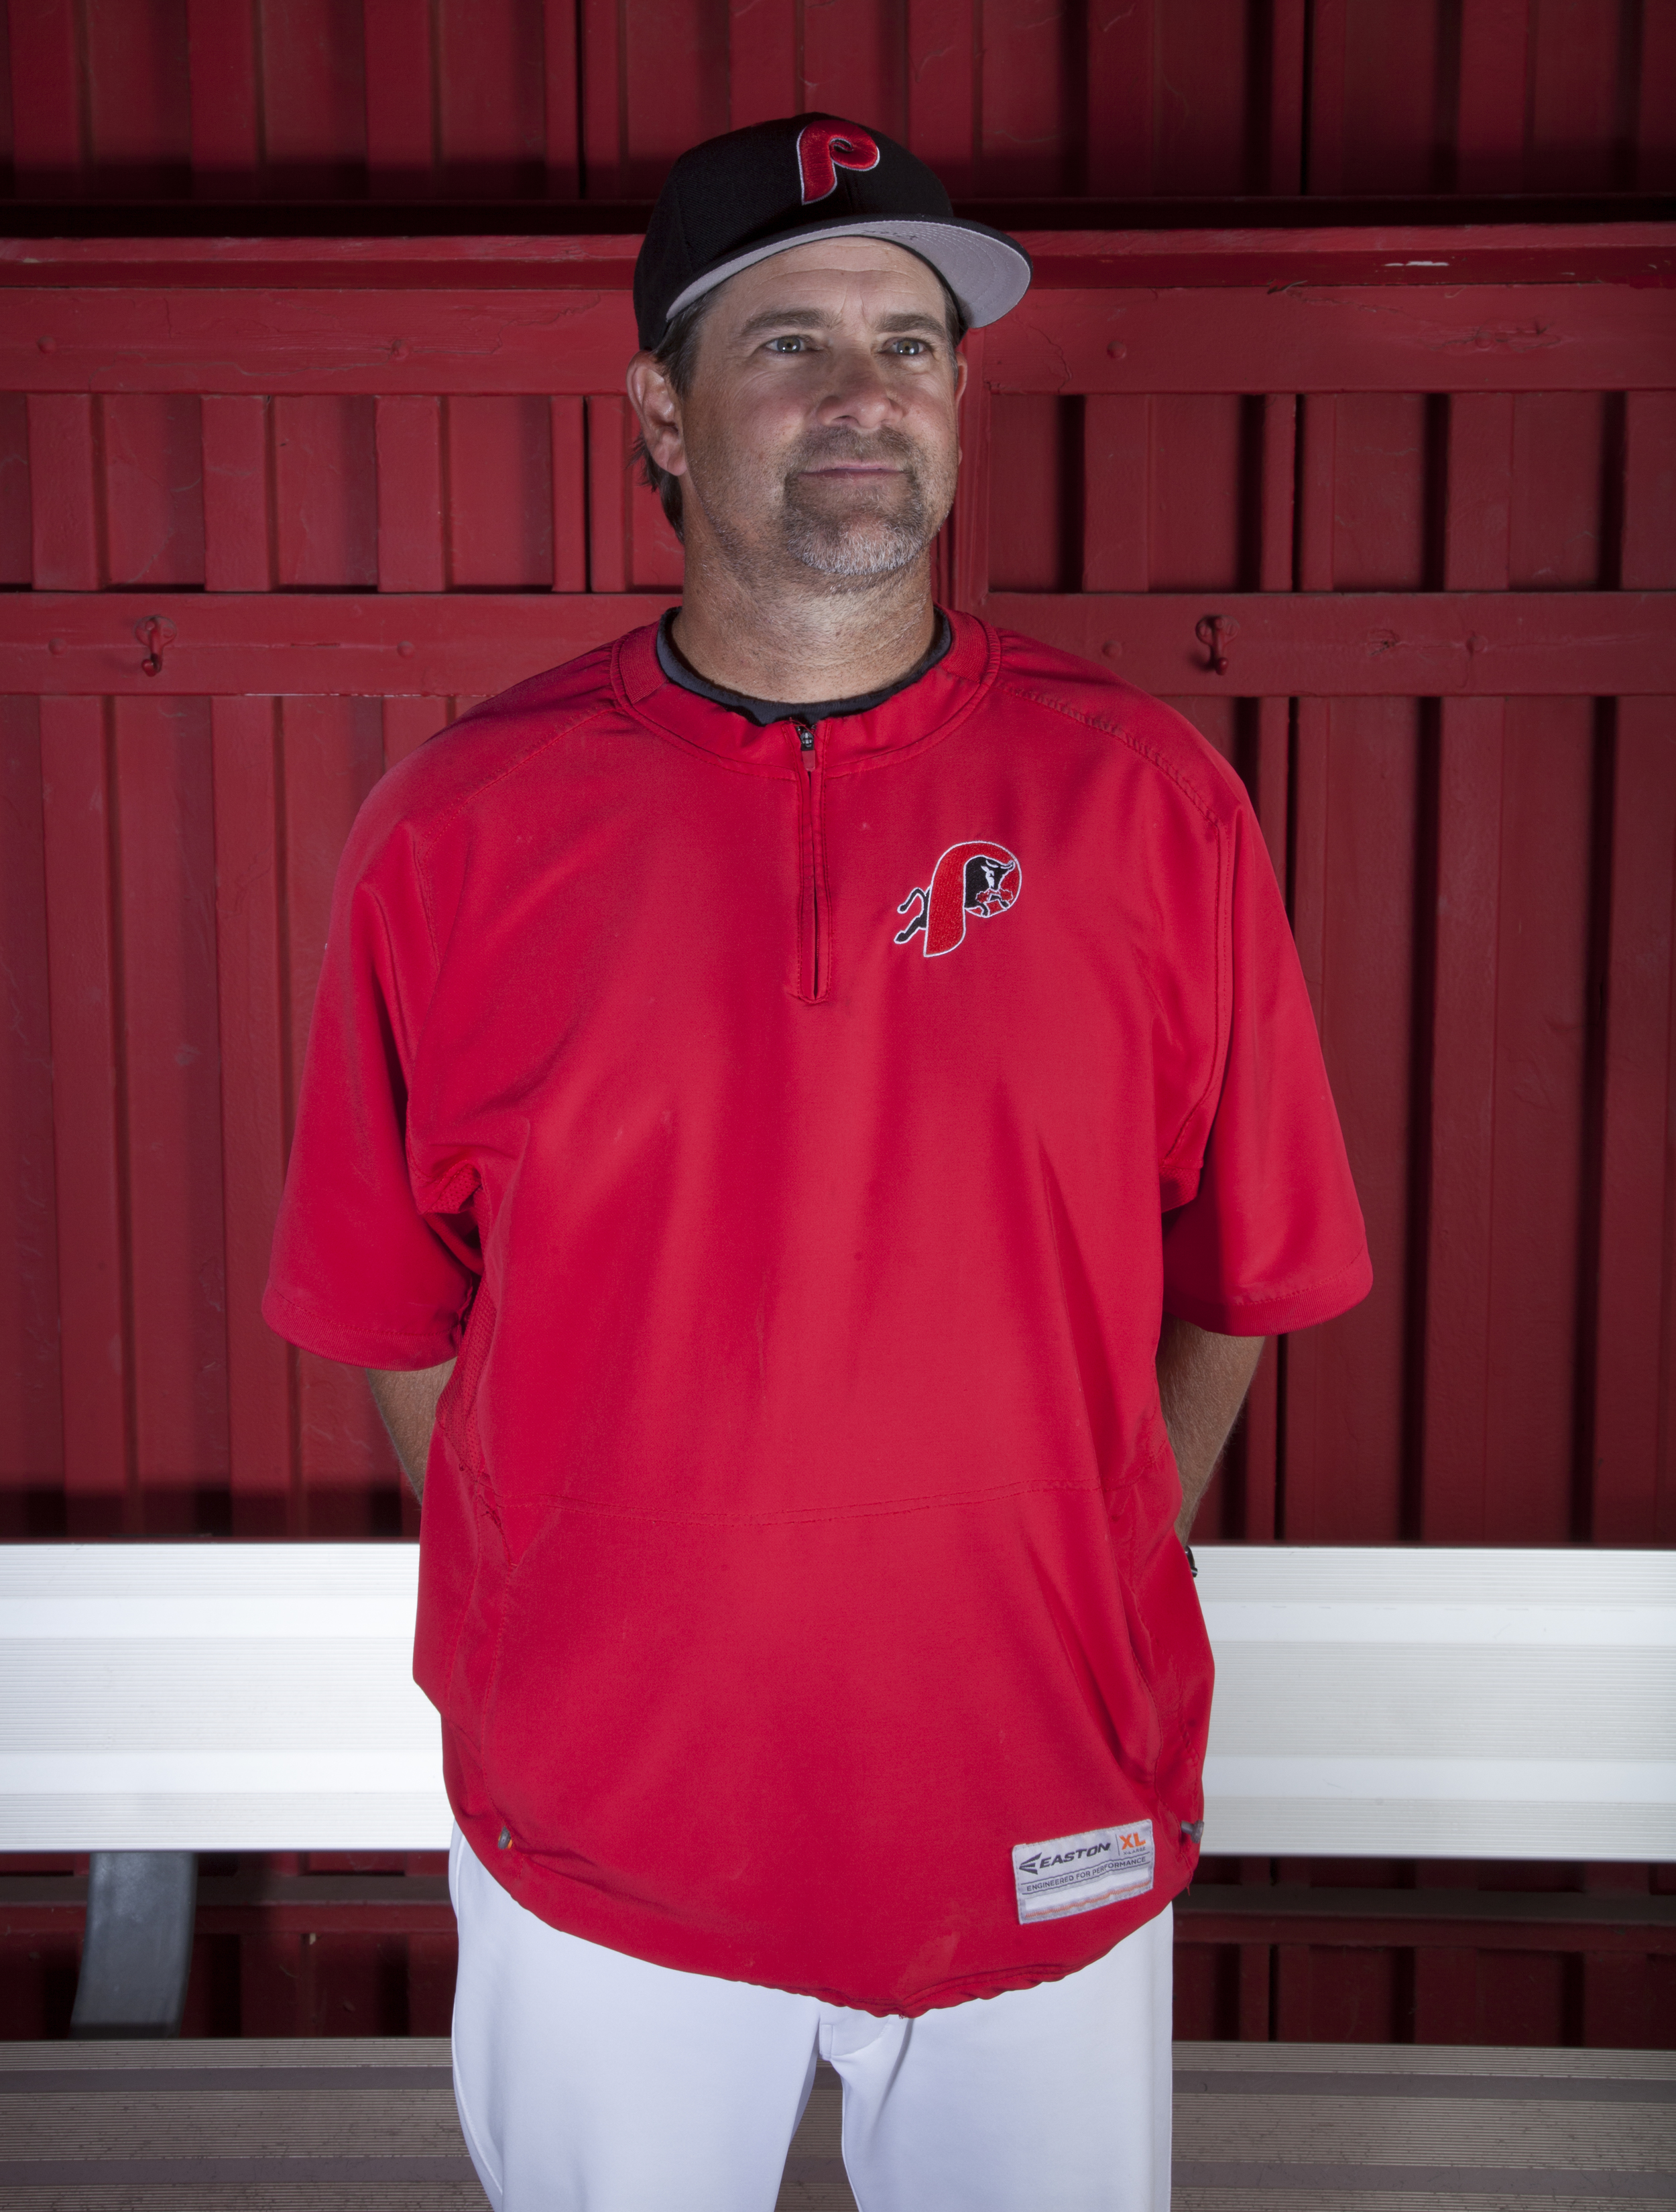  Bill Picketts coaches Pierce College's baseball team that currently has a record of 6-9. Picketts poses in the home team dugout of Joe Kelly Field on Thursday, Feb. 26, 2015. Woodland Hills, Calif.  Read the full story  here  